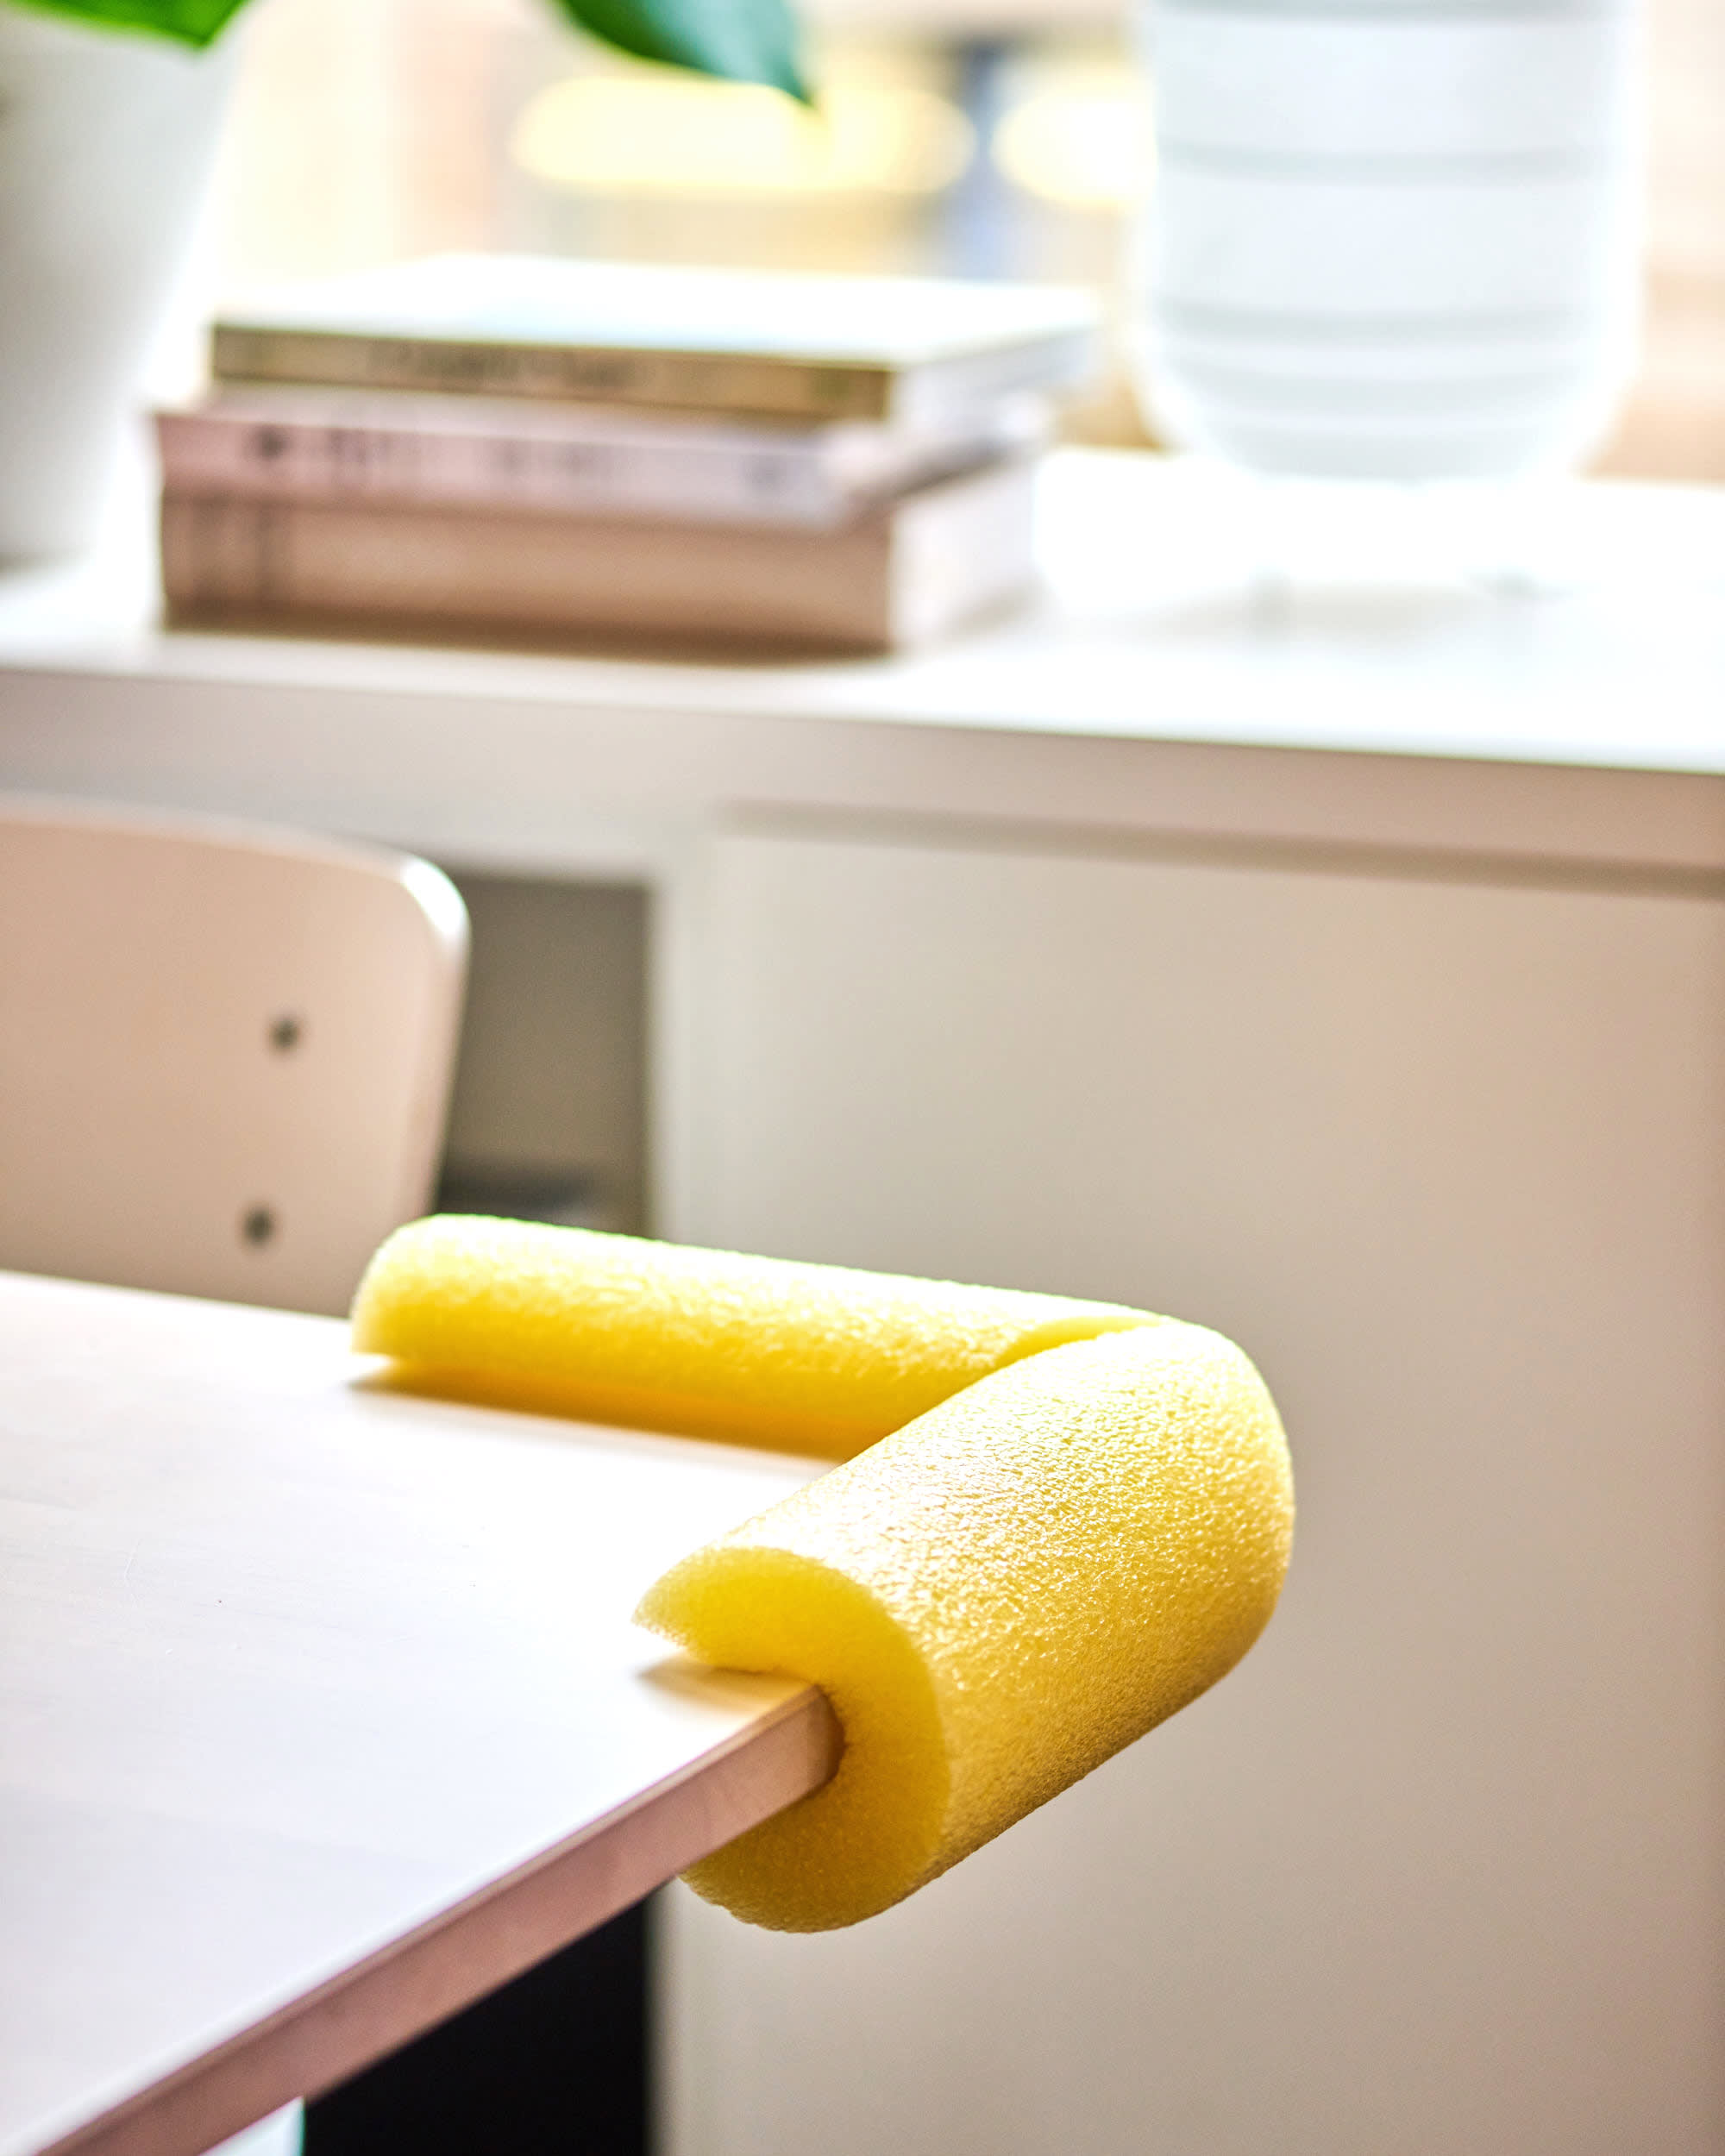 7 Ways to Use a Pool Noodle Around the House